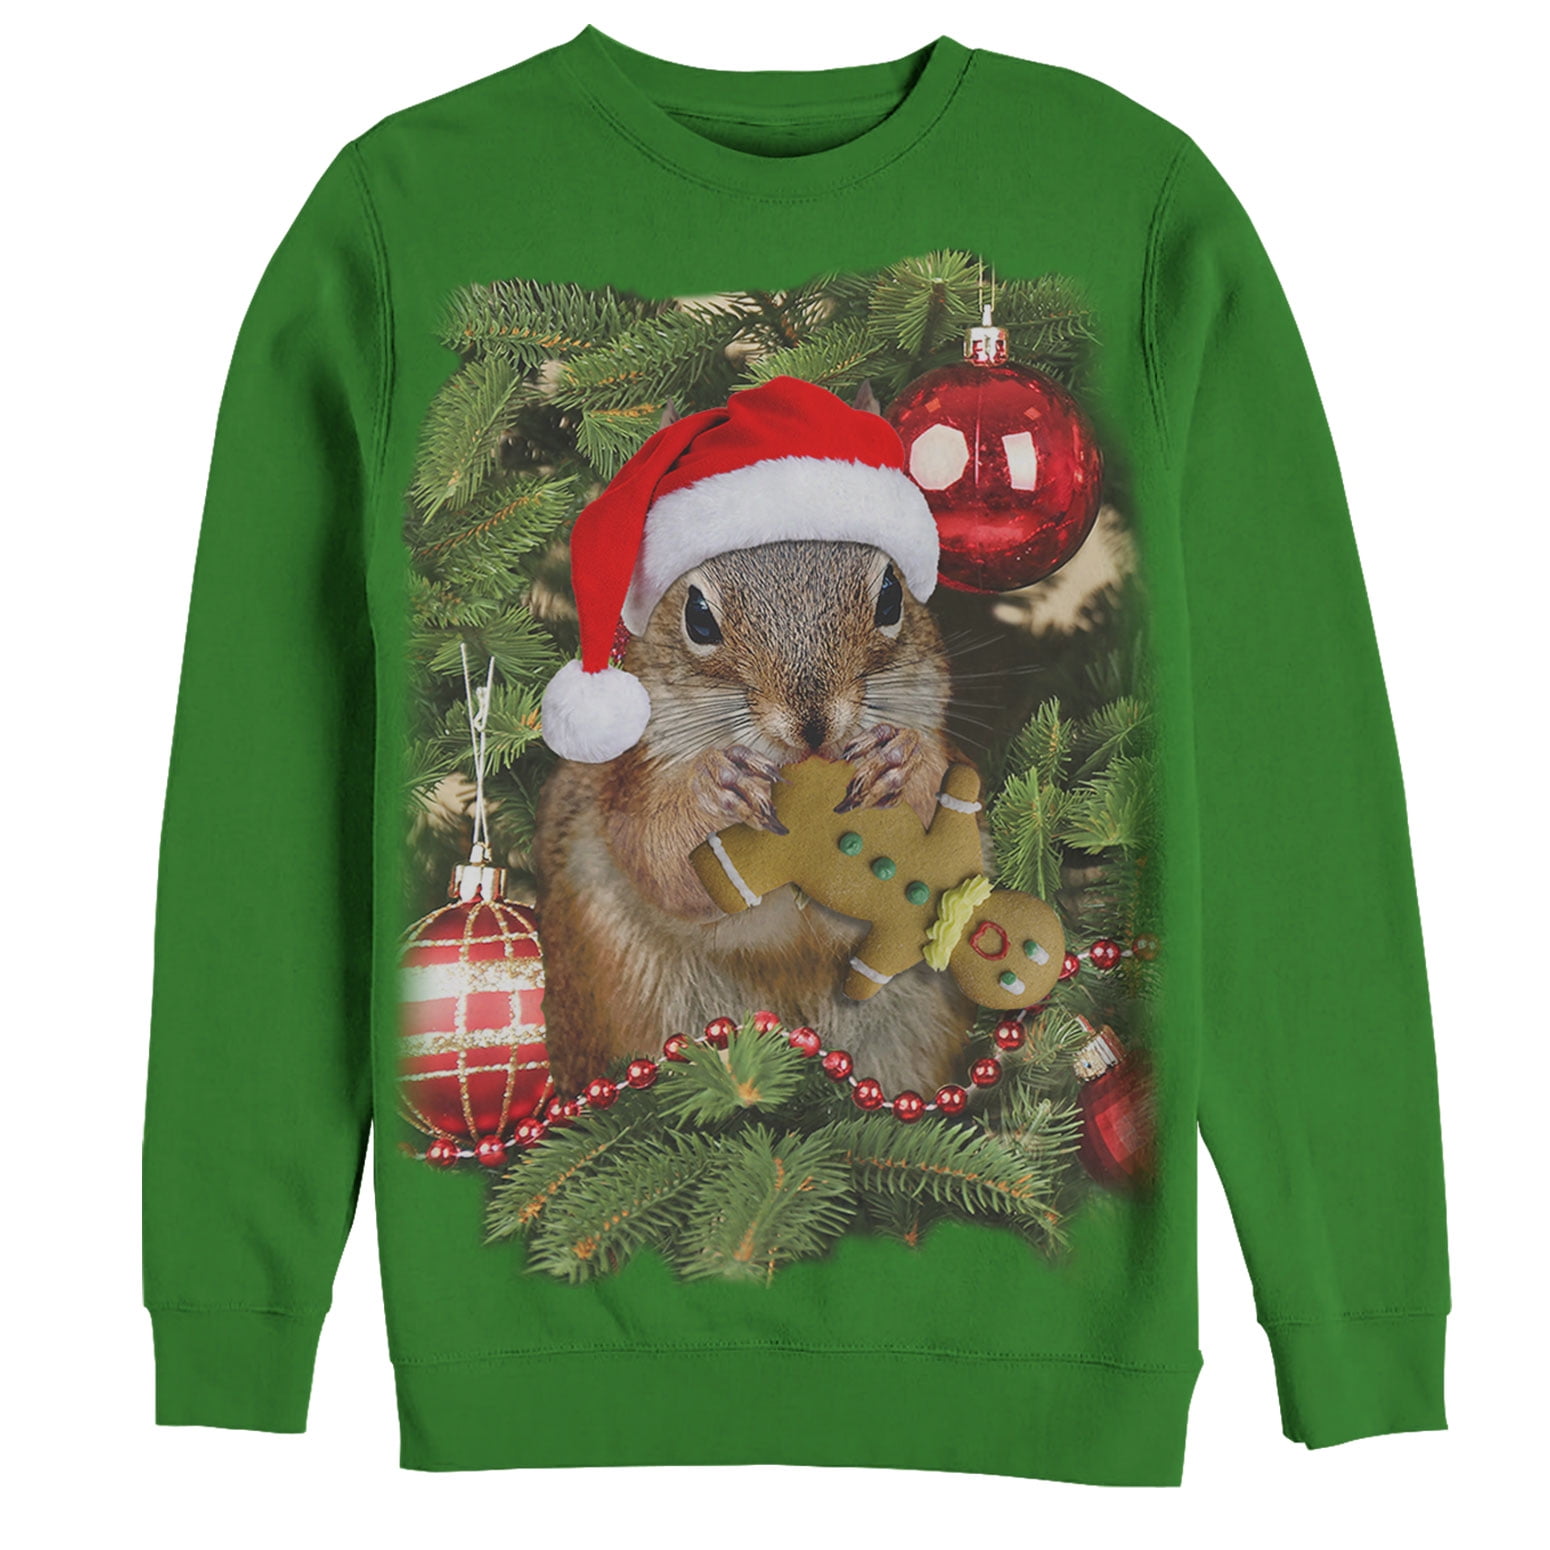 sweatshirt nuts about christmas funny holiday ugly sweater party shirt squirrel 